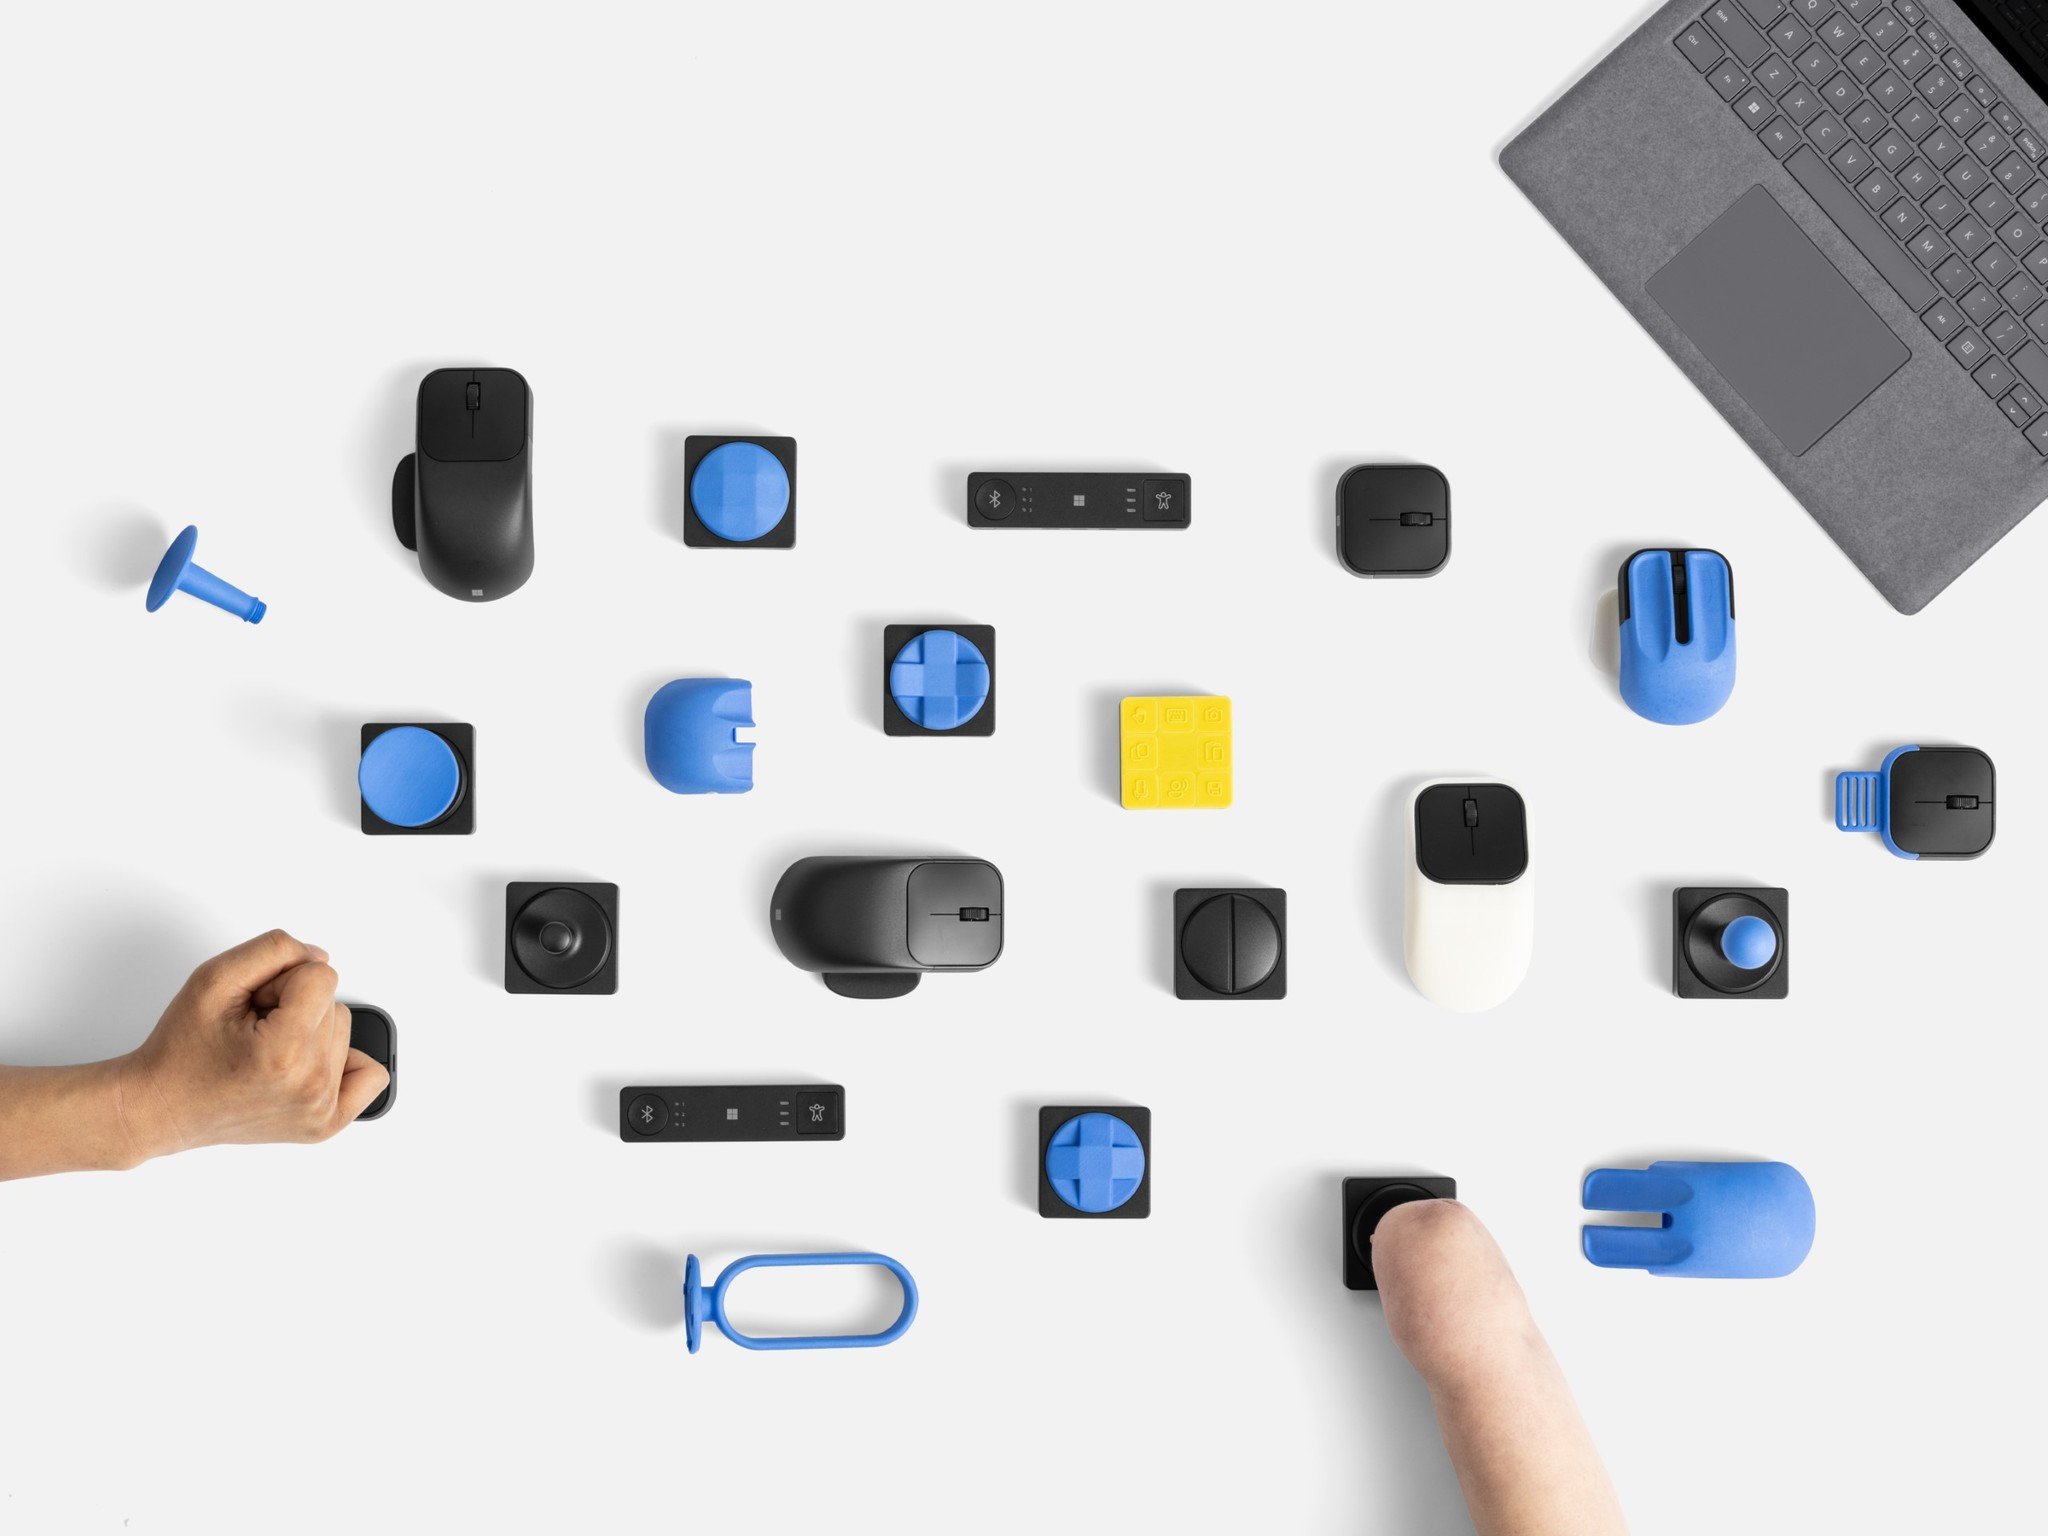 Microsoft unveils new adaptive Personal computer extras with modular parts